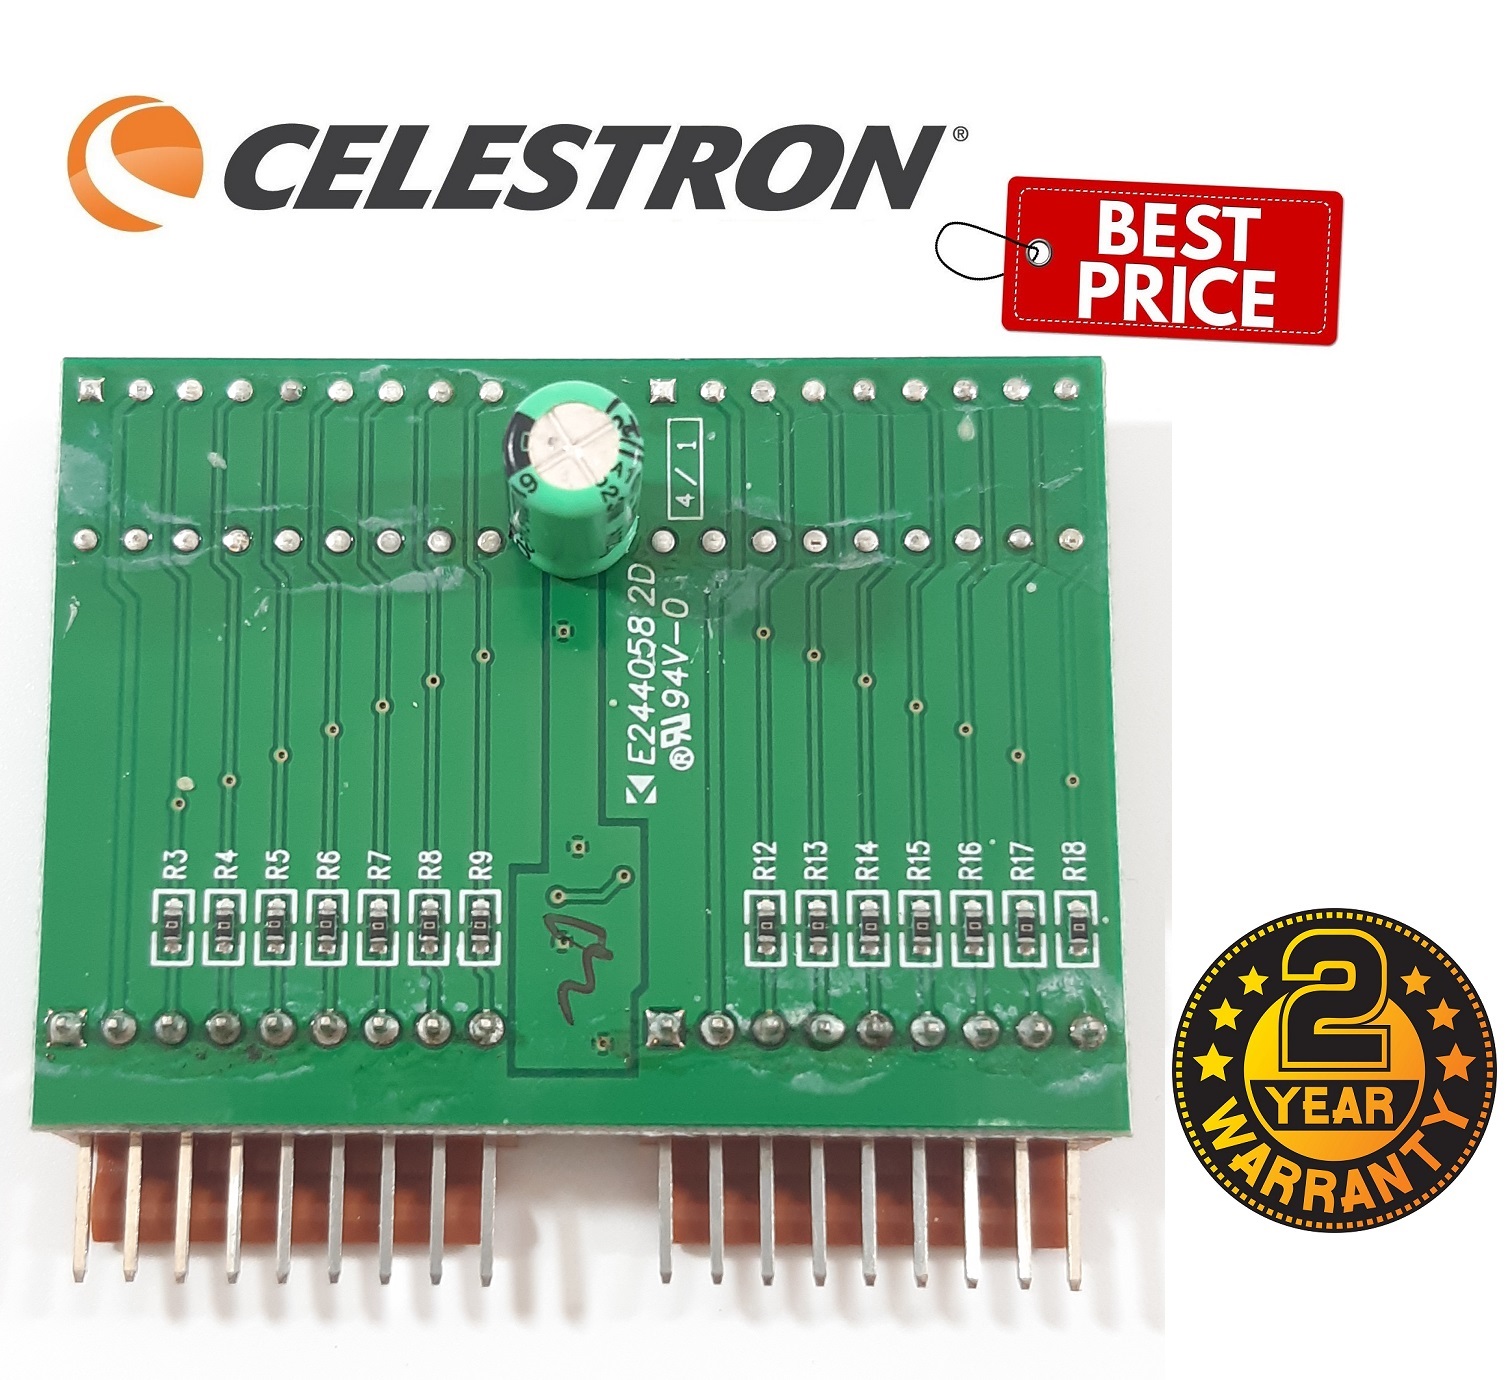 Celestron NXW443 ESD (daughter board) - CGE PRO